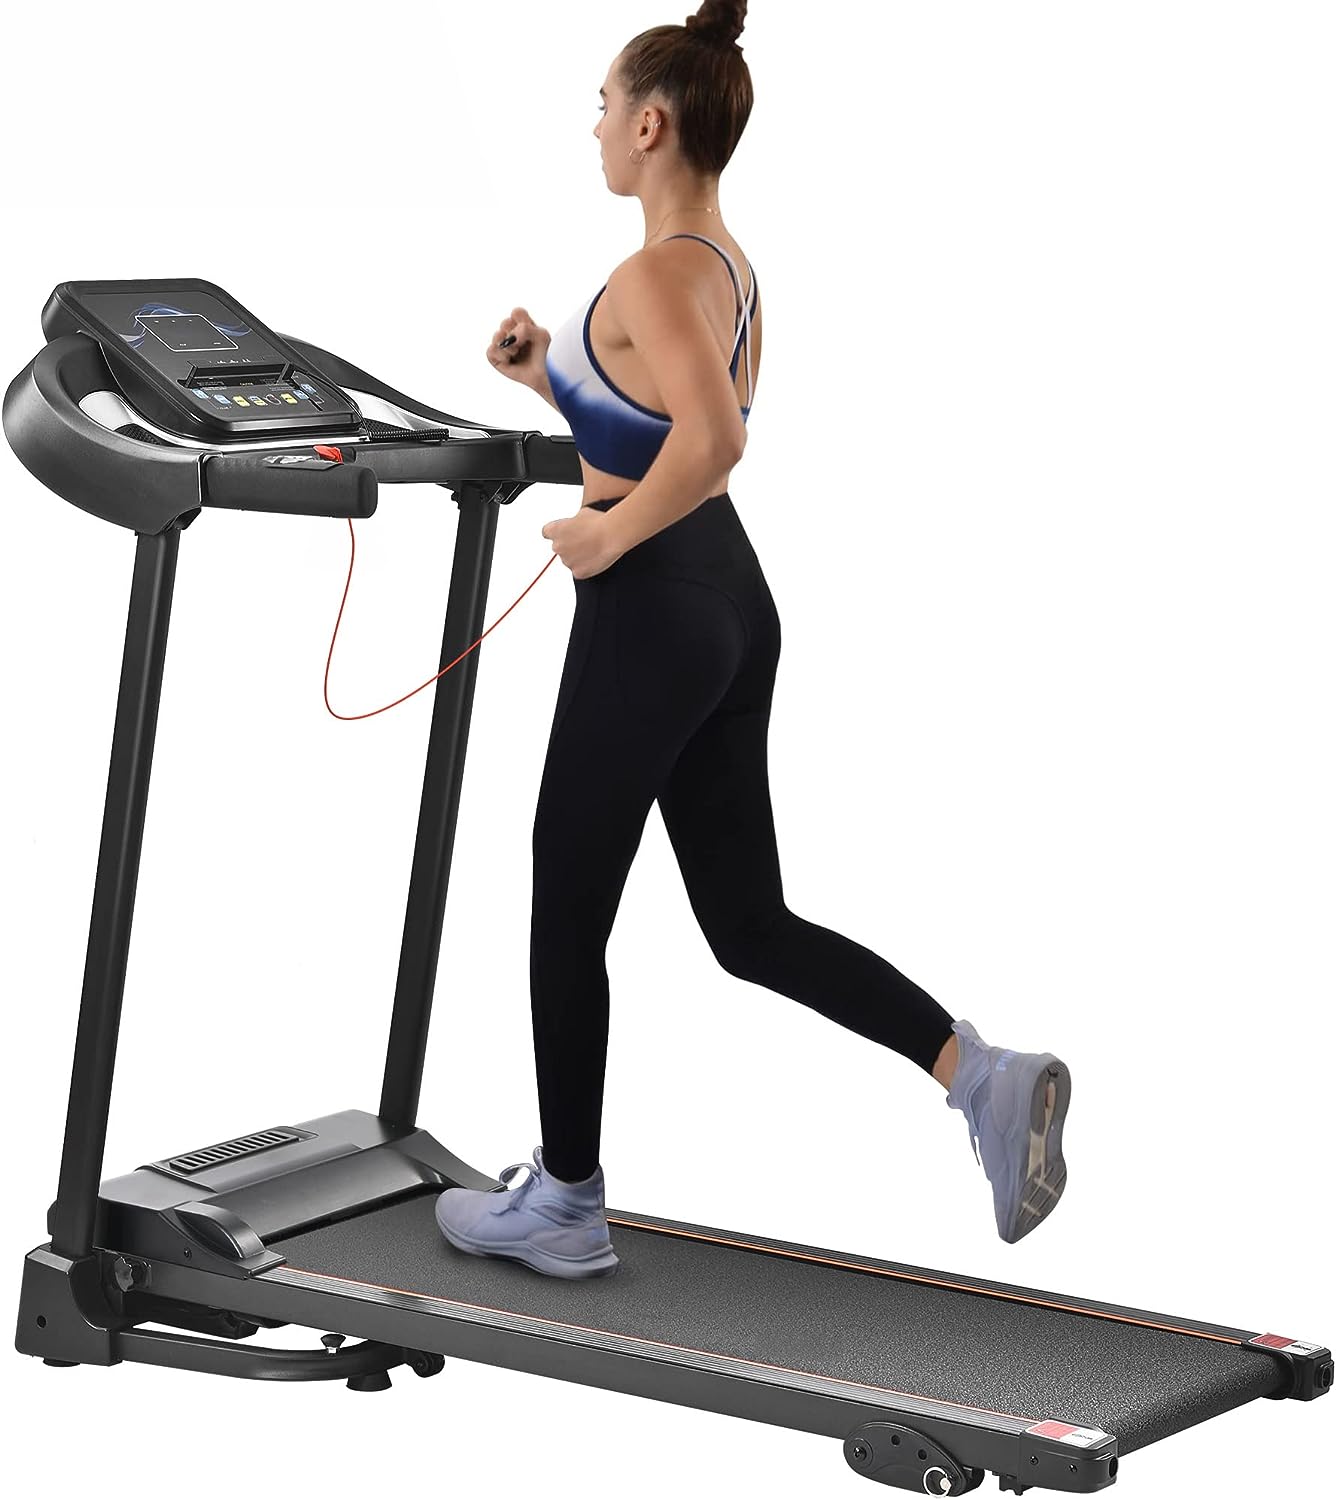 Merax Folding Electric Treadmill with Incline 2.5HP Energy Saving Motor 12 Preset Programs Running Walking Jogging Machine for Home Office Indoor Cardio Exercise